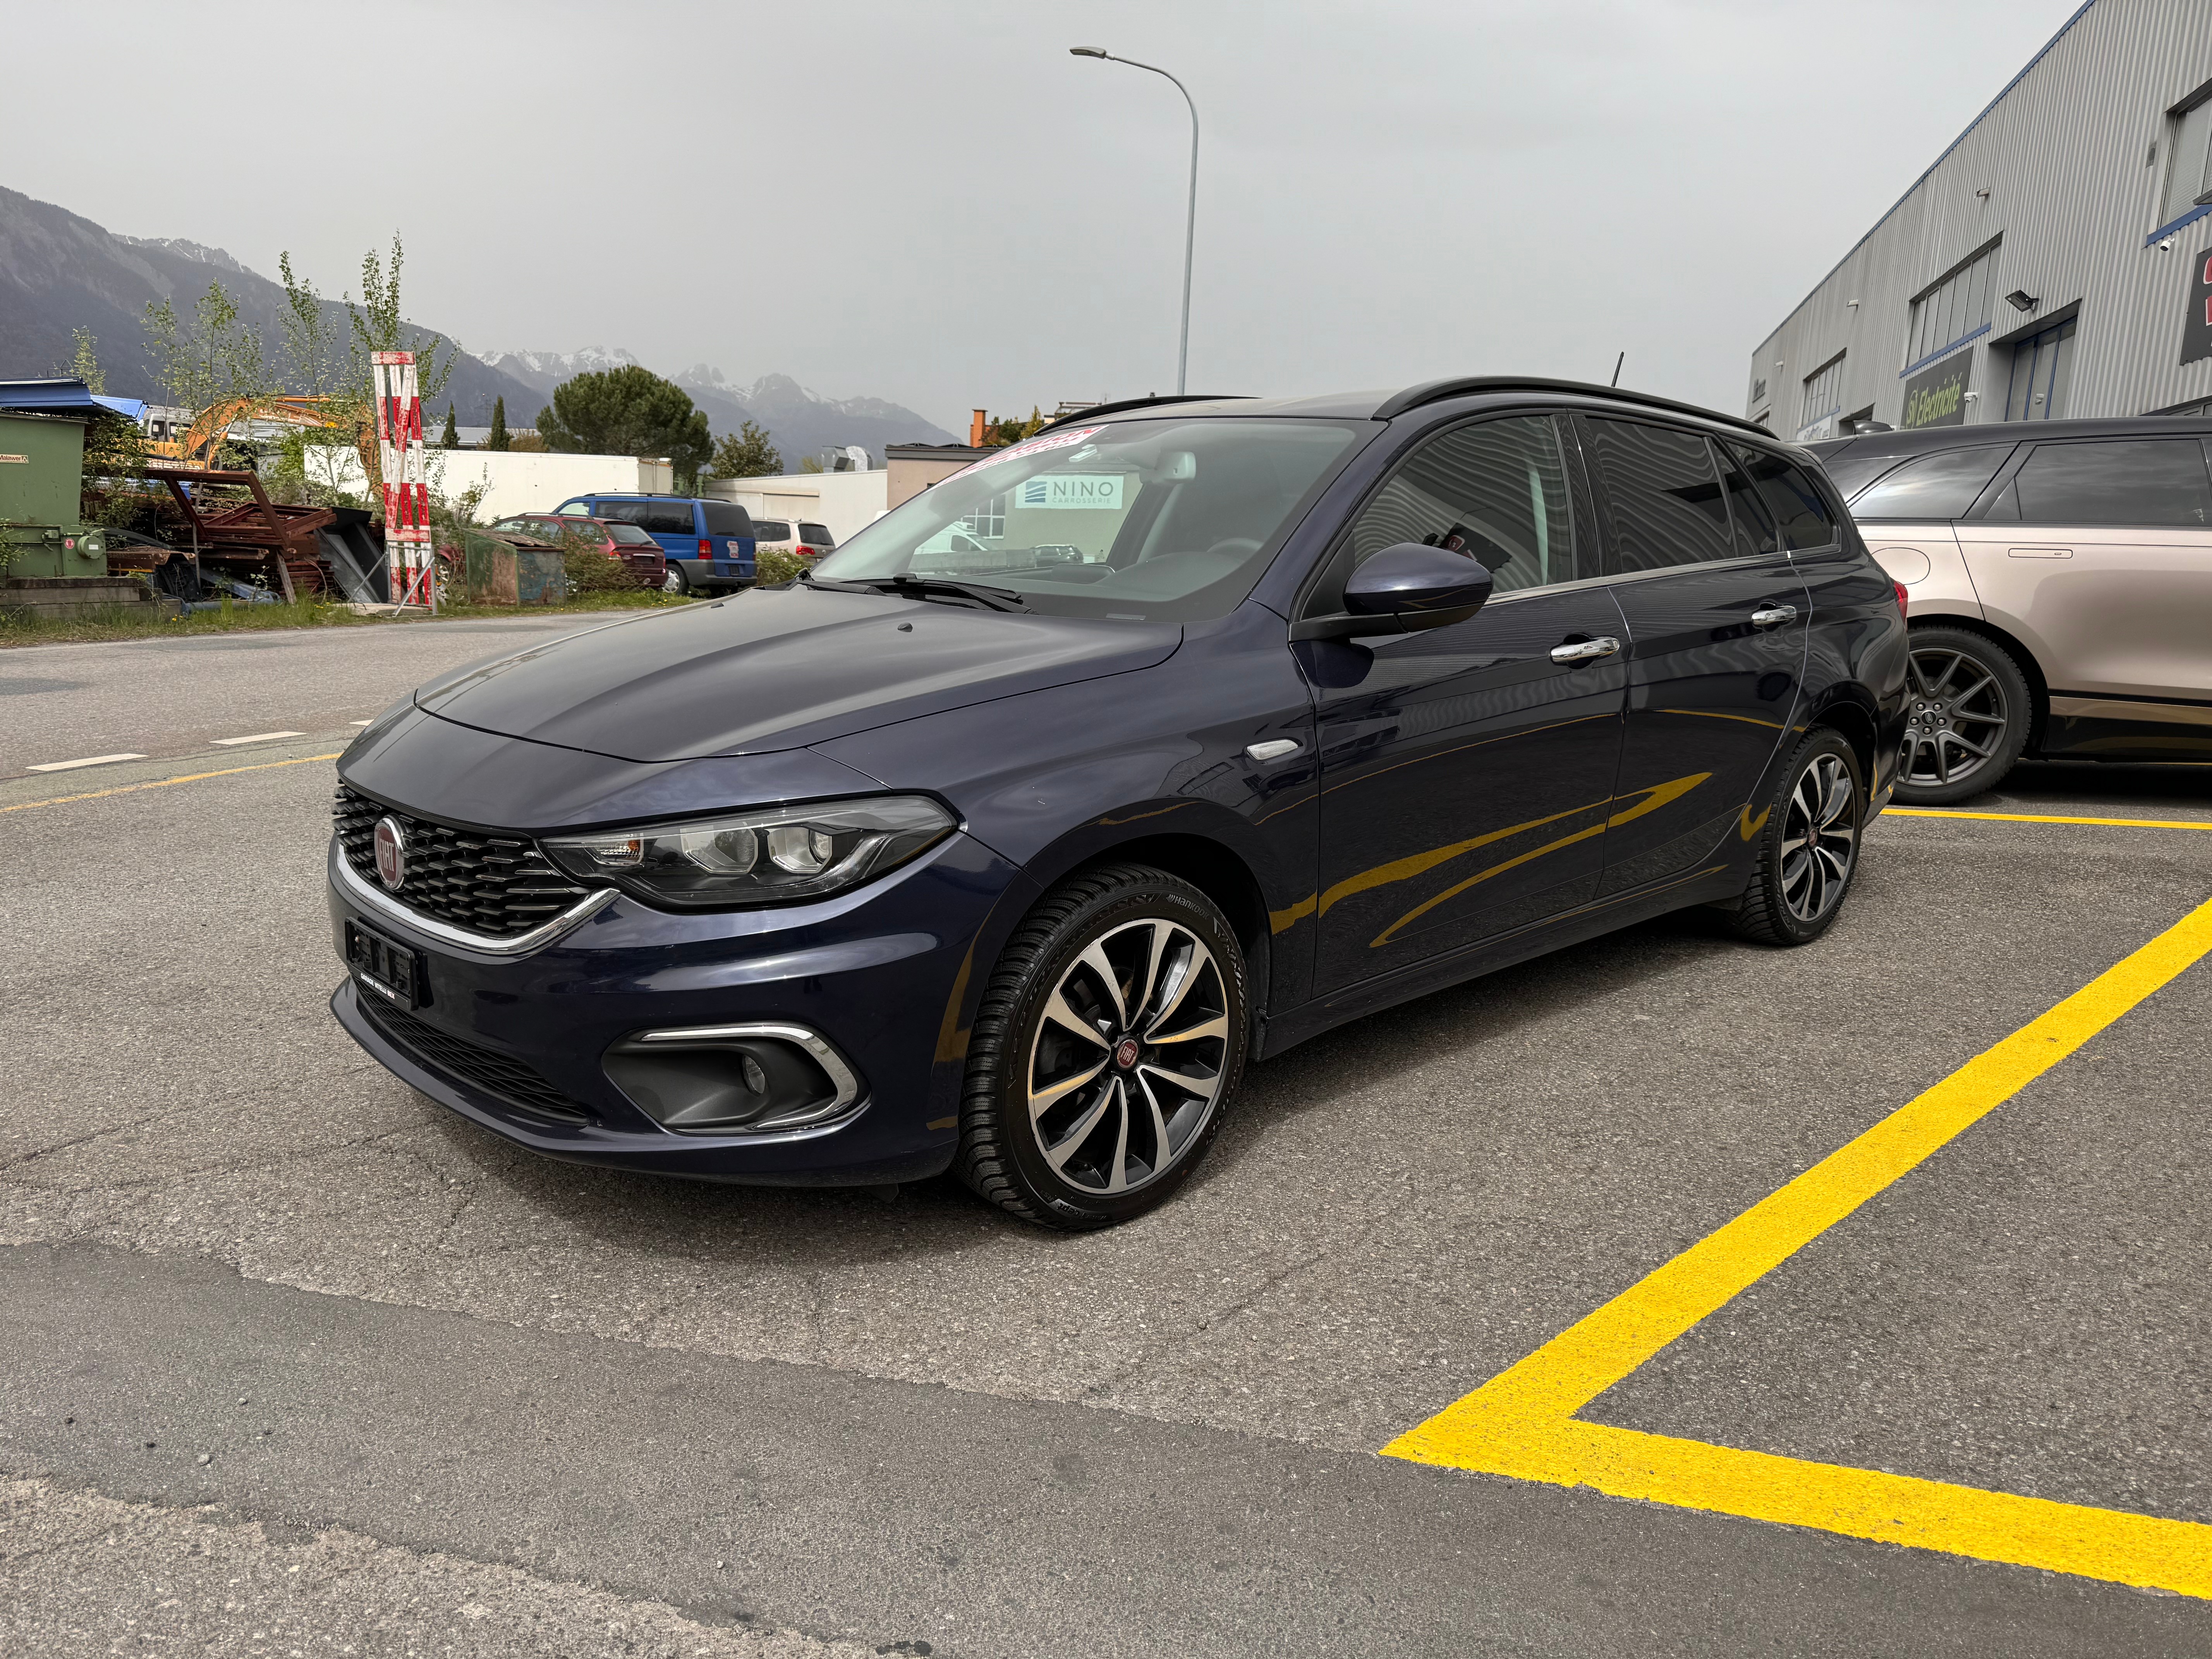 FIAT Tipo 1.6MJ Station Wagon Lounge DCT